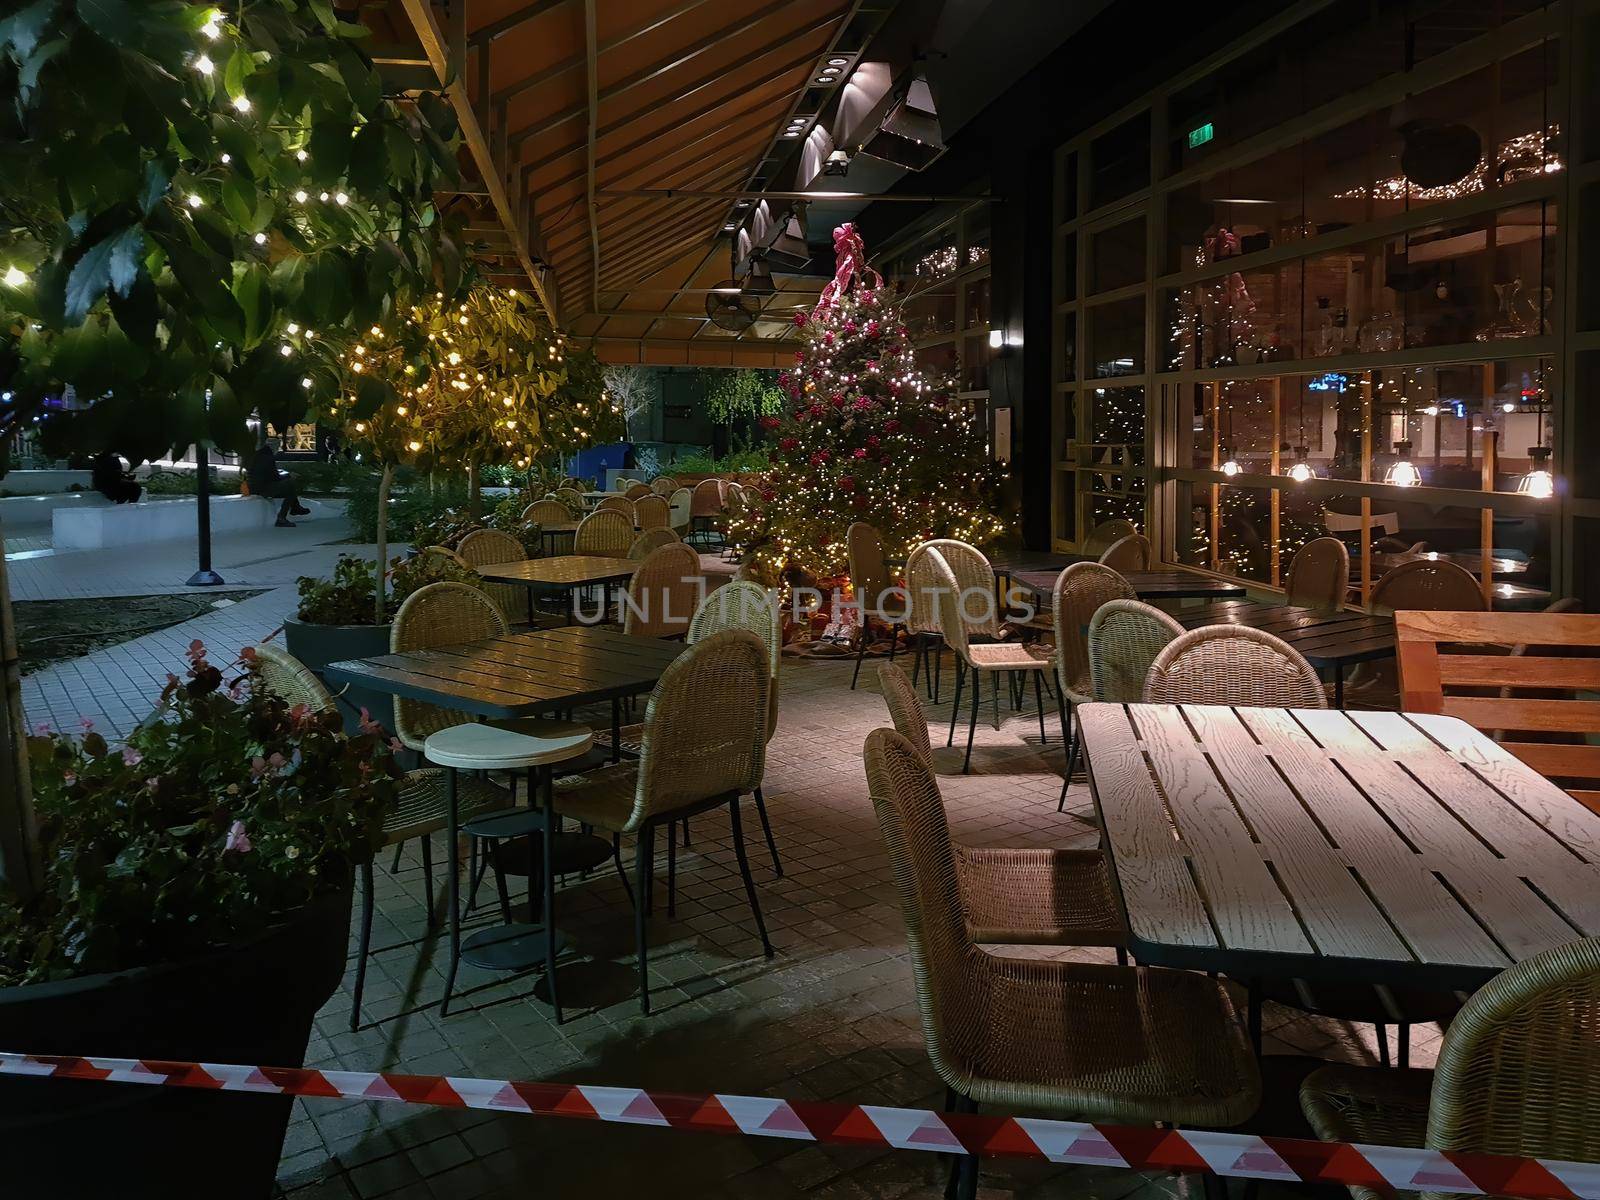 Bar at night without crowd and no access ribbon at outdoor seating area closed due to covid-19 measures.